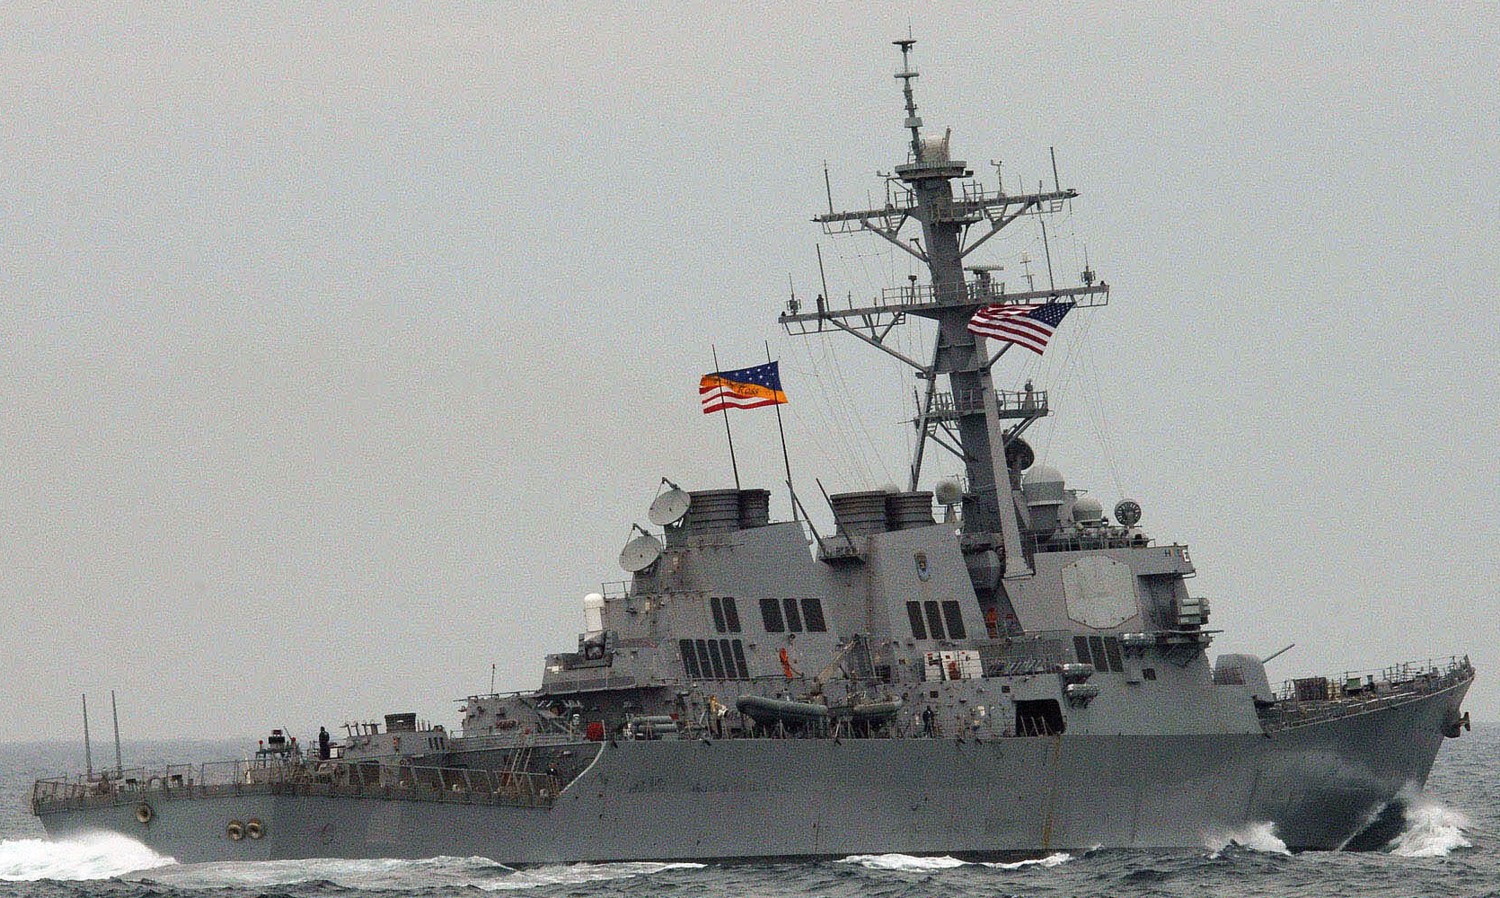 ddg-71 uss ross guided missile destroyer arleigh burke class aegis bmd 98